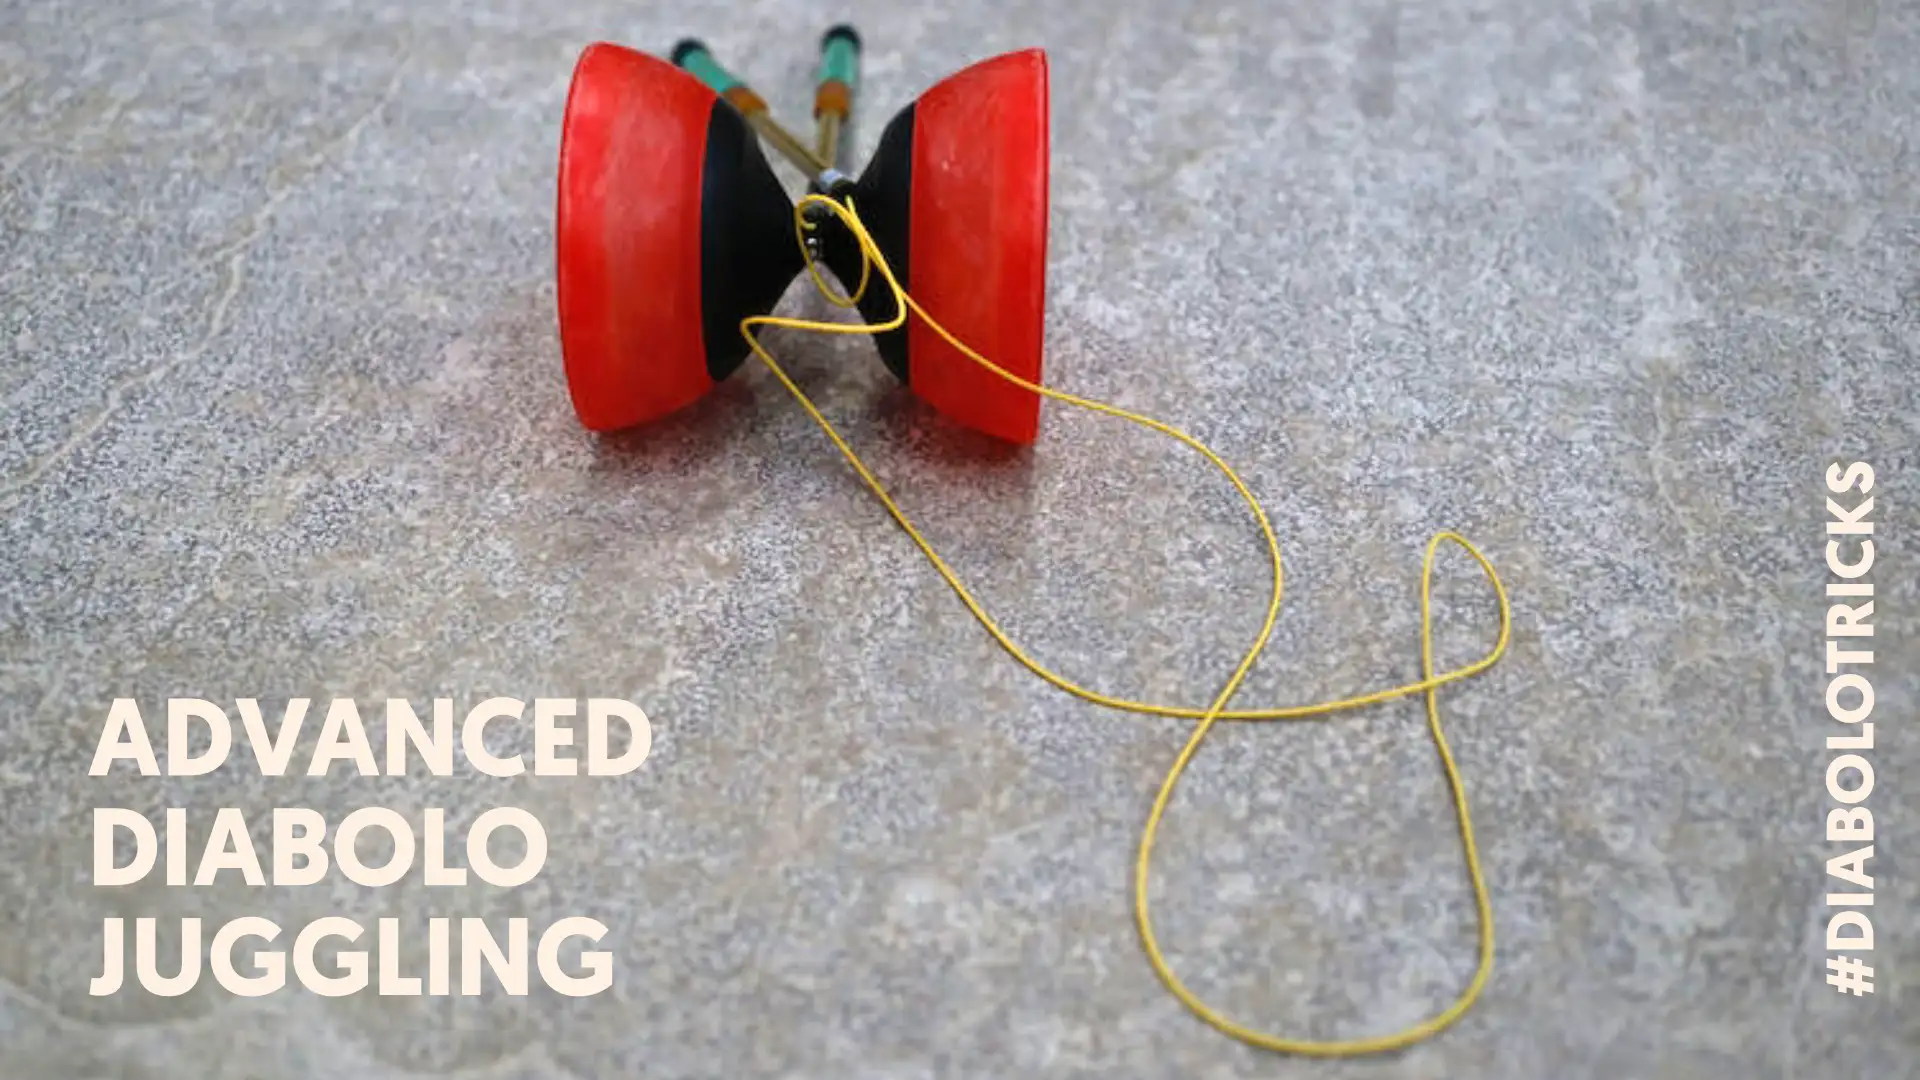 Ready to Geek Out? Unlock this Advanced Diabolo Juggling Patterns